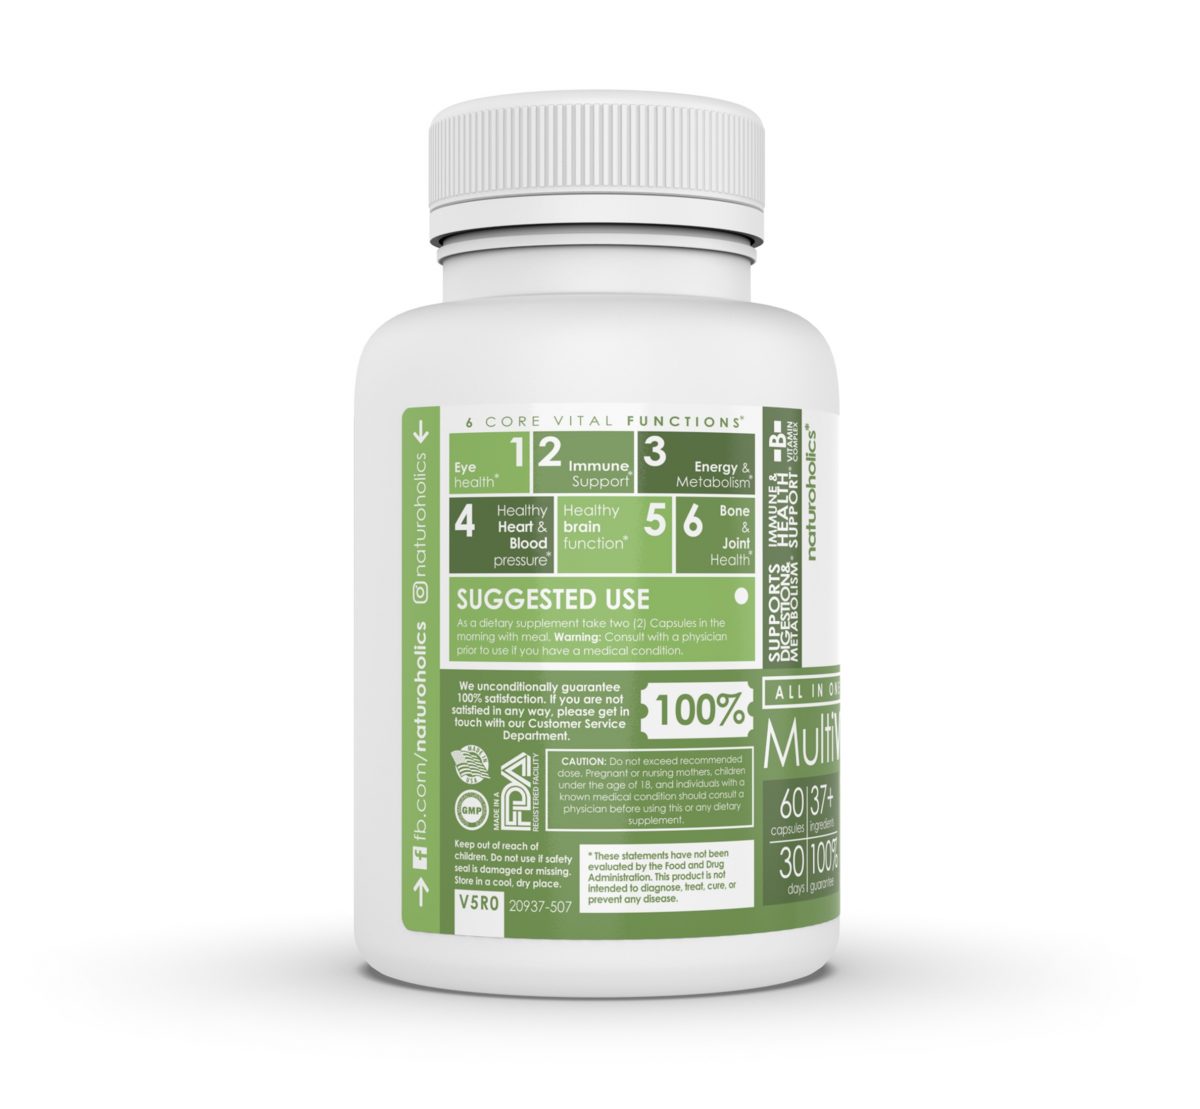 All-in-One Multivitamins